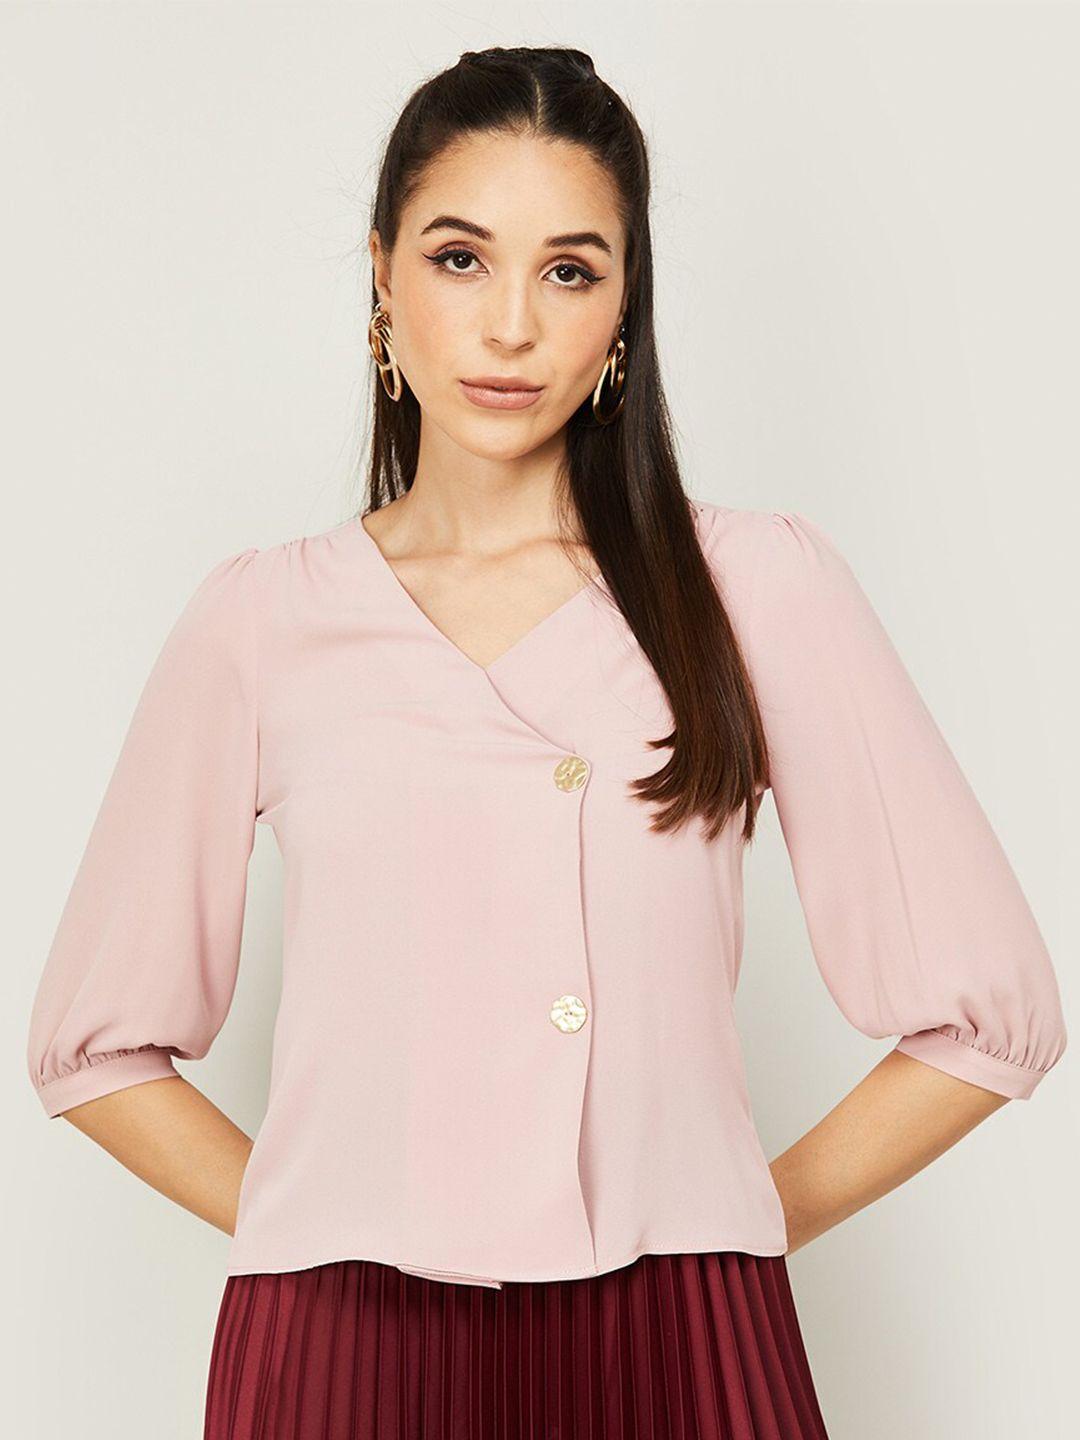 code by lifestyle v-neck puffed sleeves top